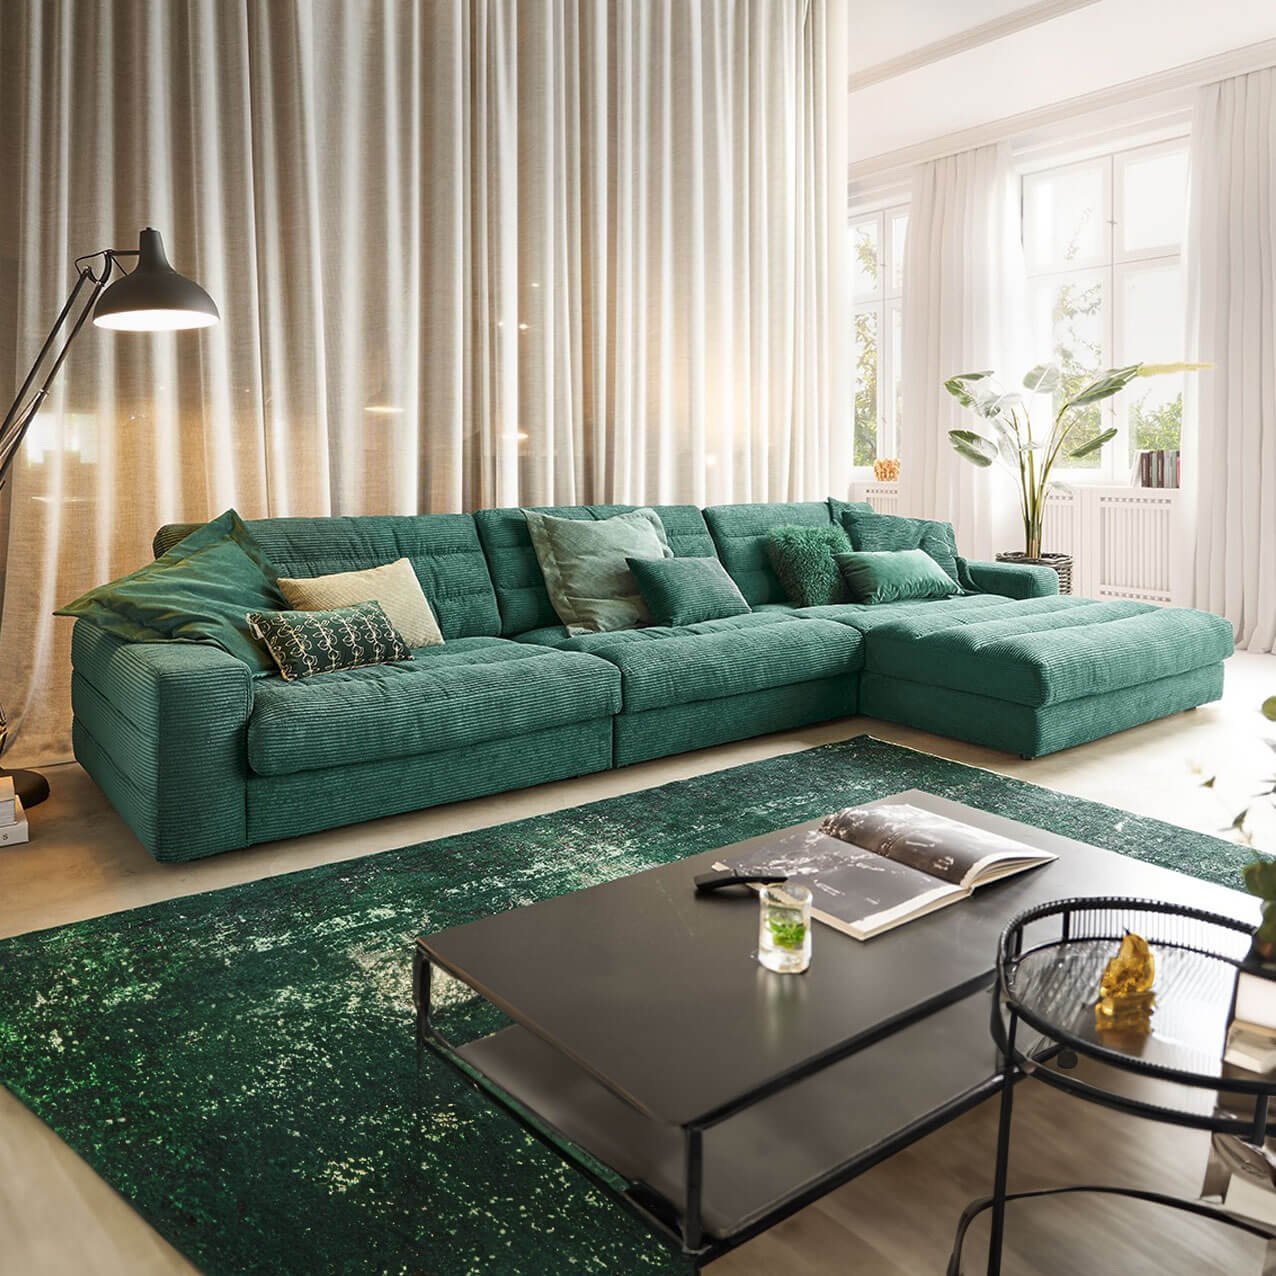 5 Tips for Choosing the Perfect Sofa for Your Home at Love Your Bed!